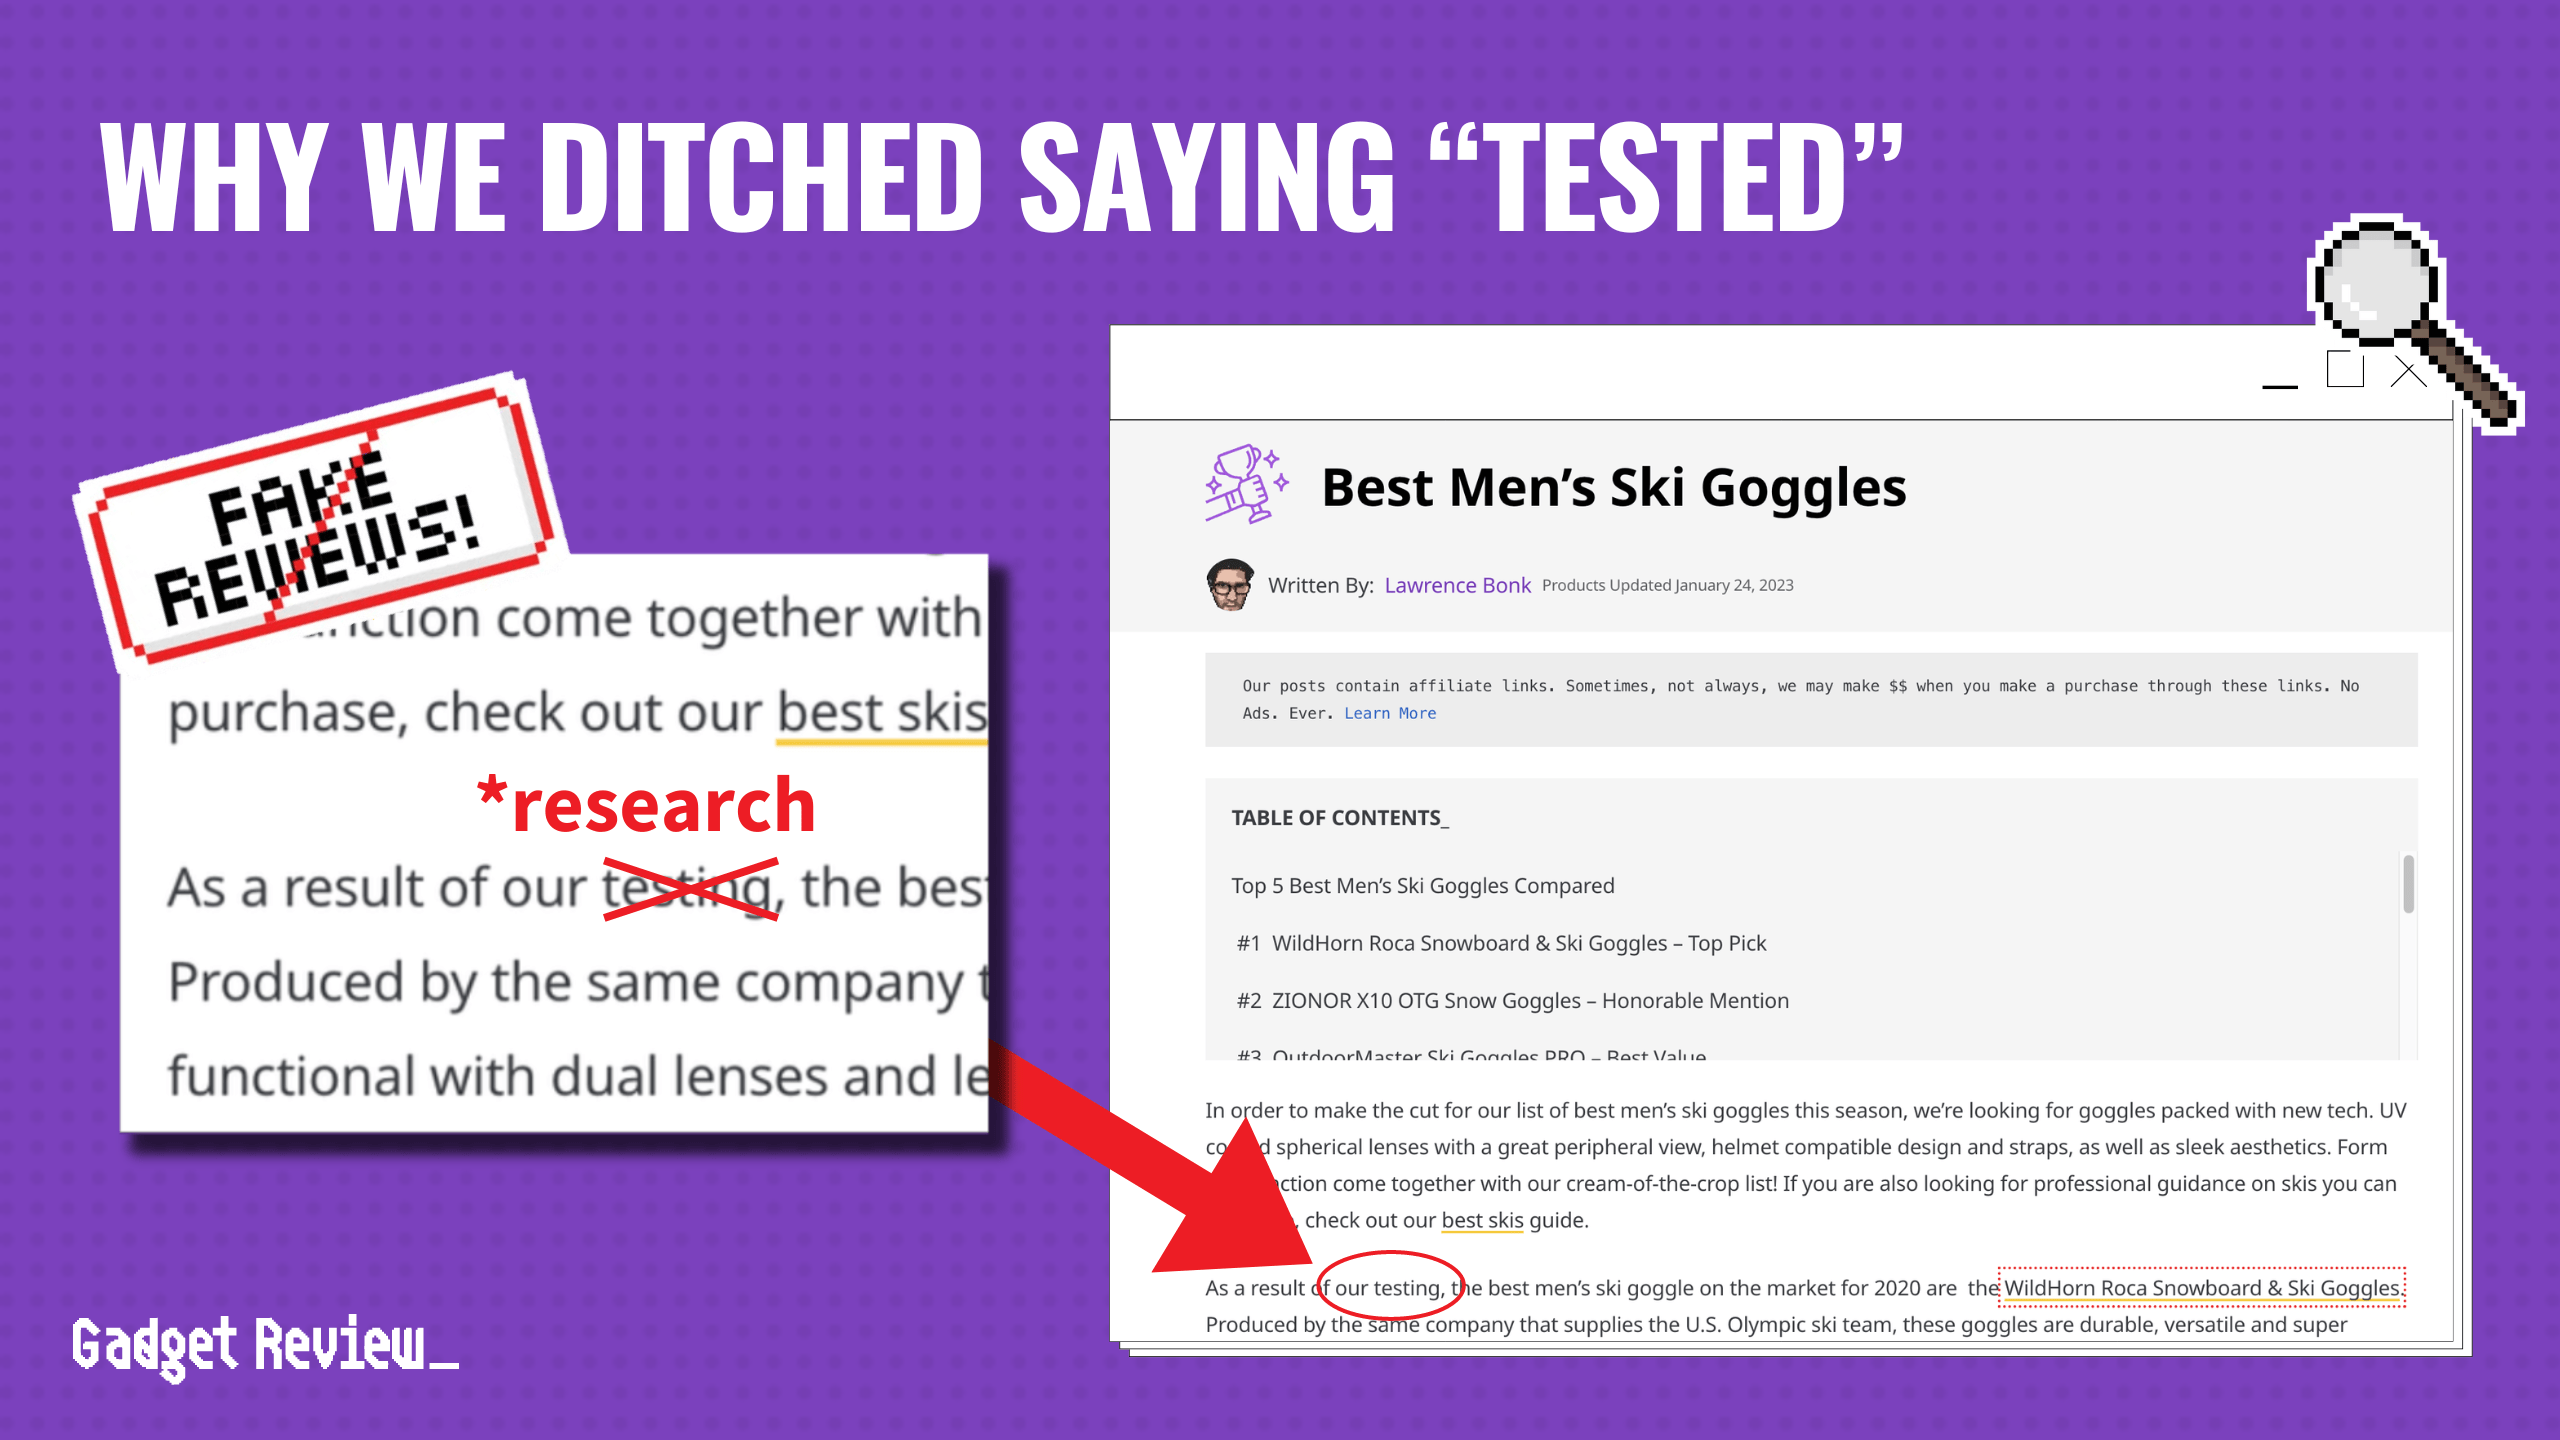 Why We Ditched Saying “Tested”